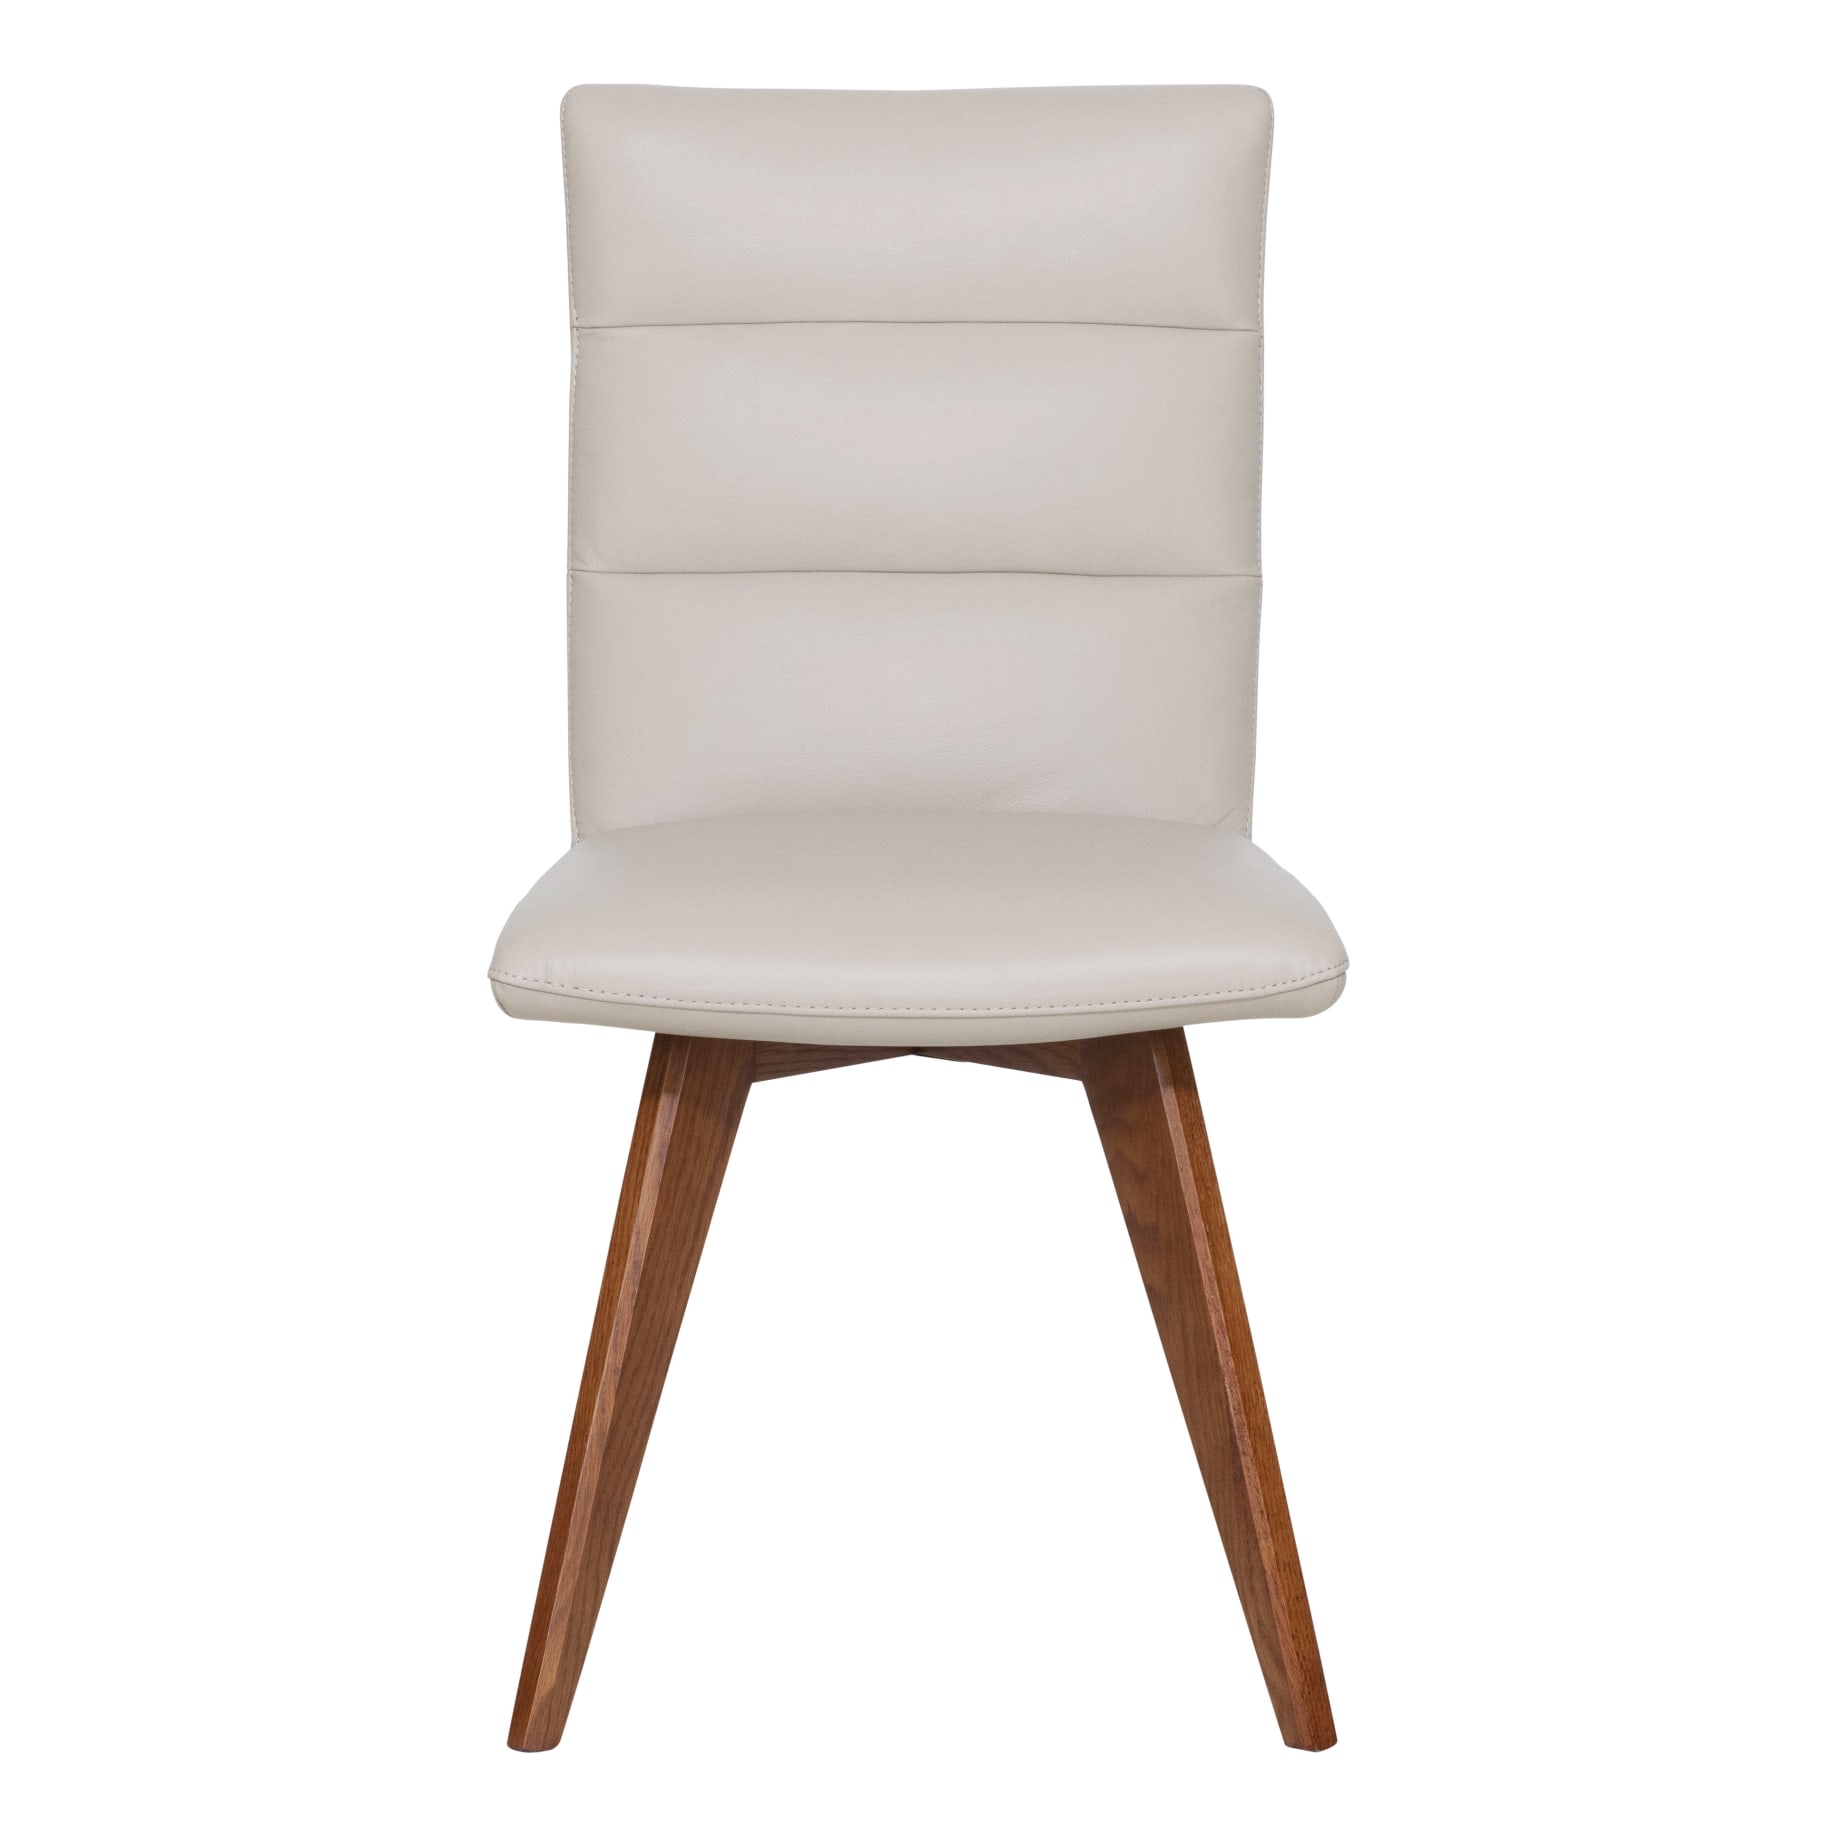 Hudson Dining Chair in Leather Mocha / Blackwood Stain